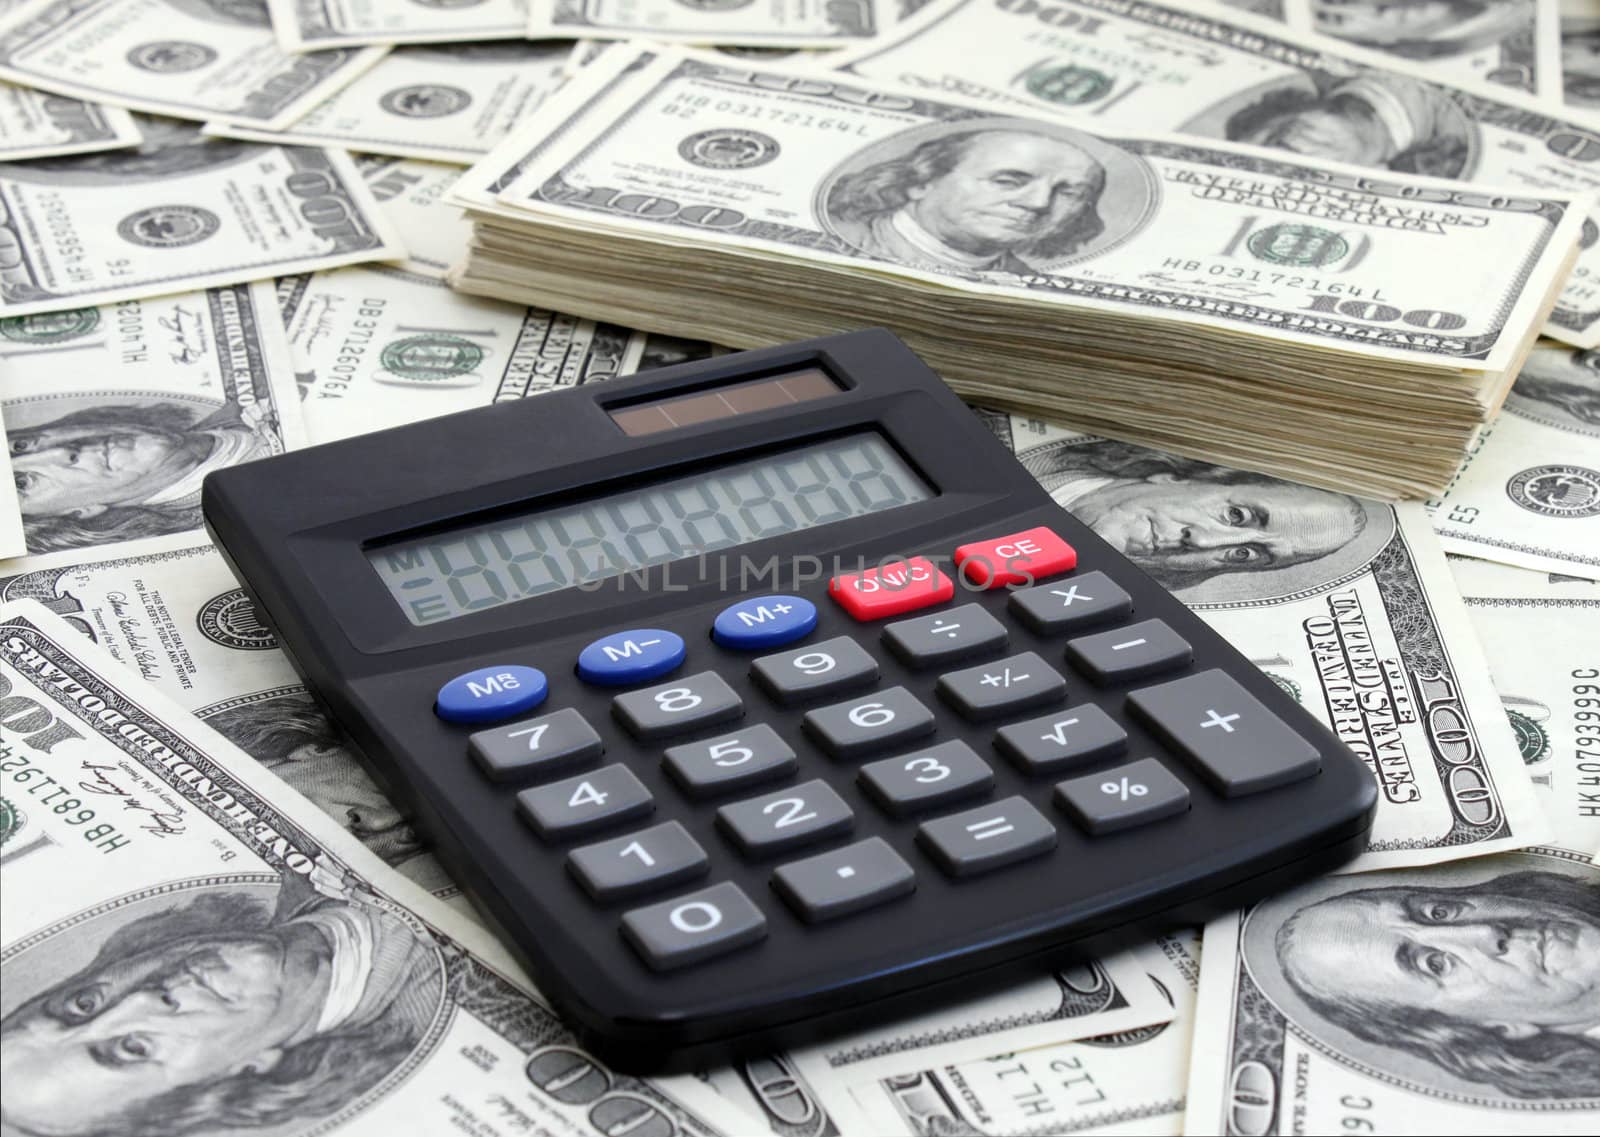 calculating income: calculator near a pile of dollars